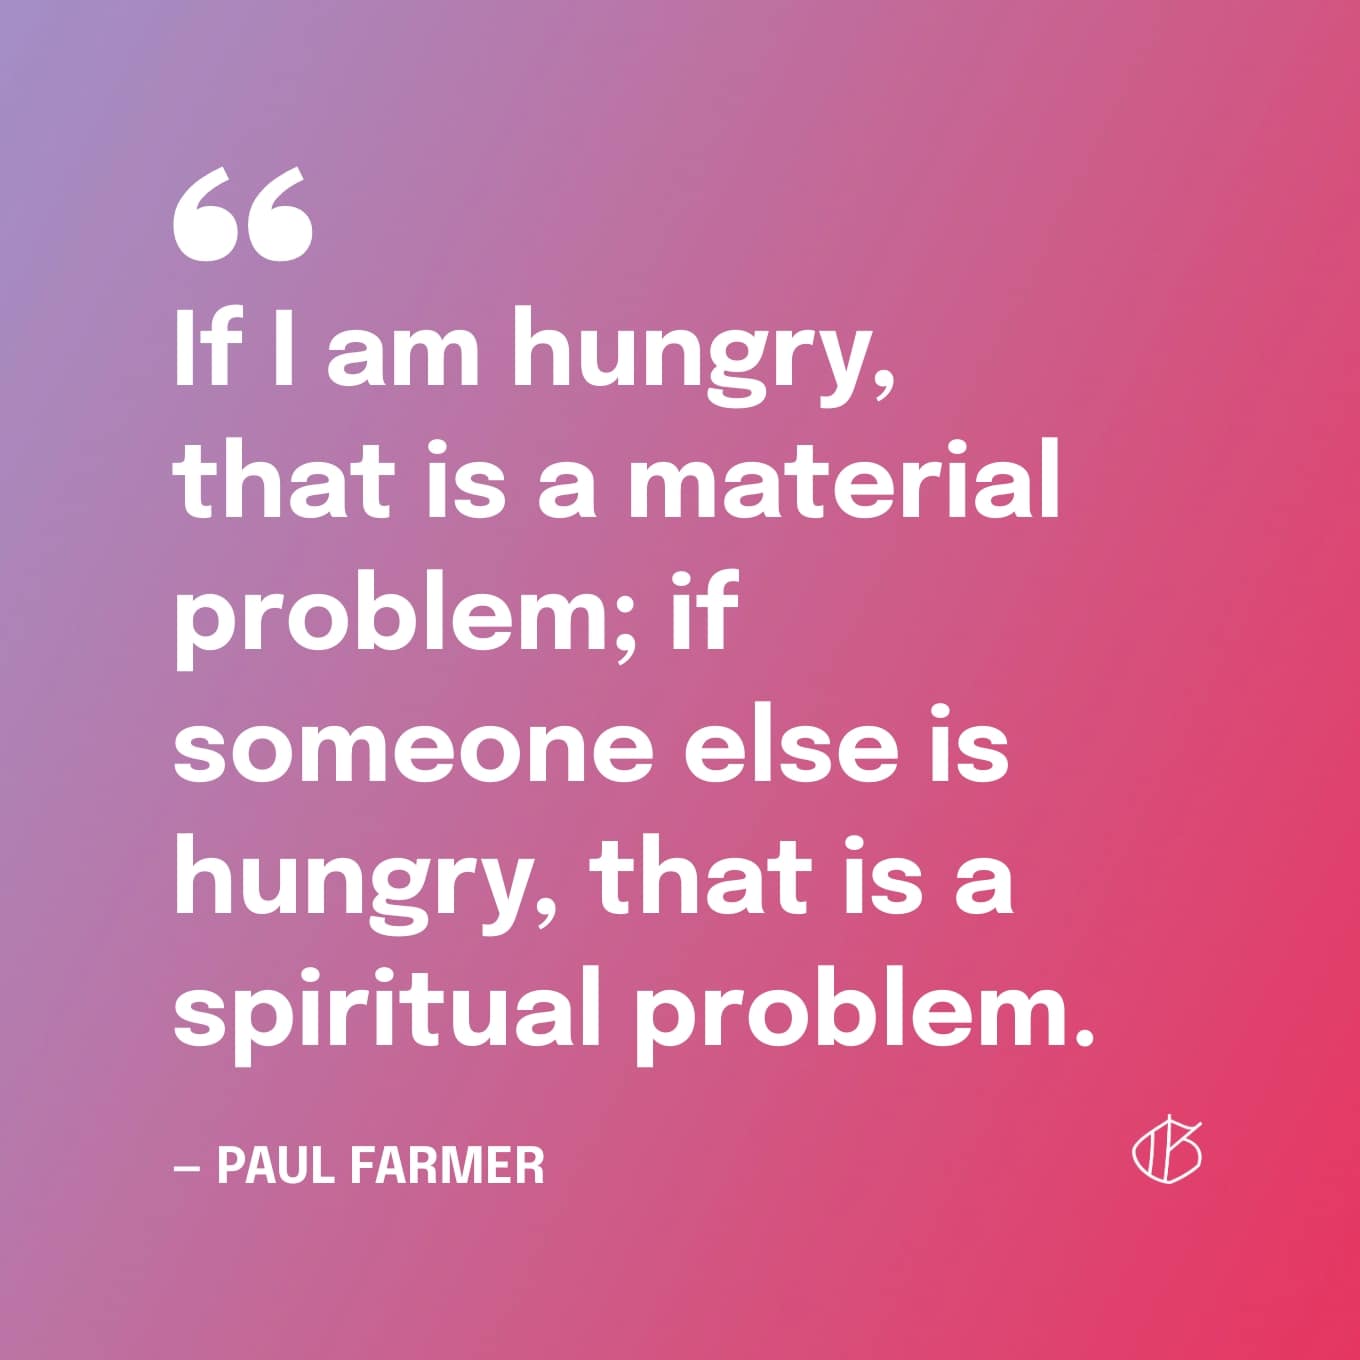 “If I am hungry, that is a material problem; if someone else is hungry, that is a spiritual problem.” — Paul Farmer